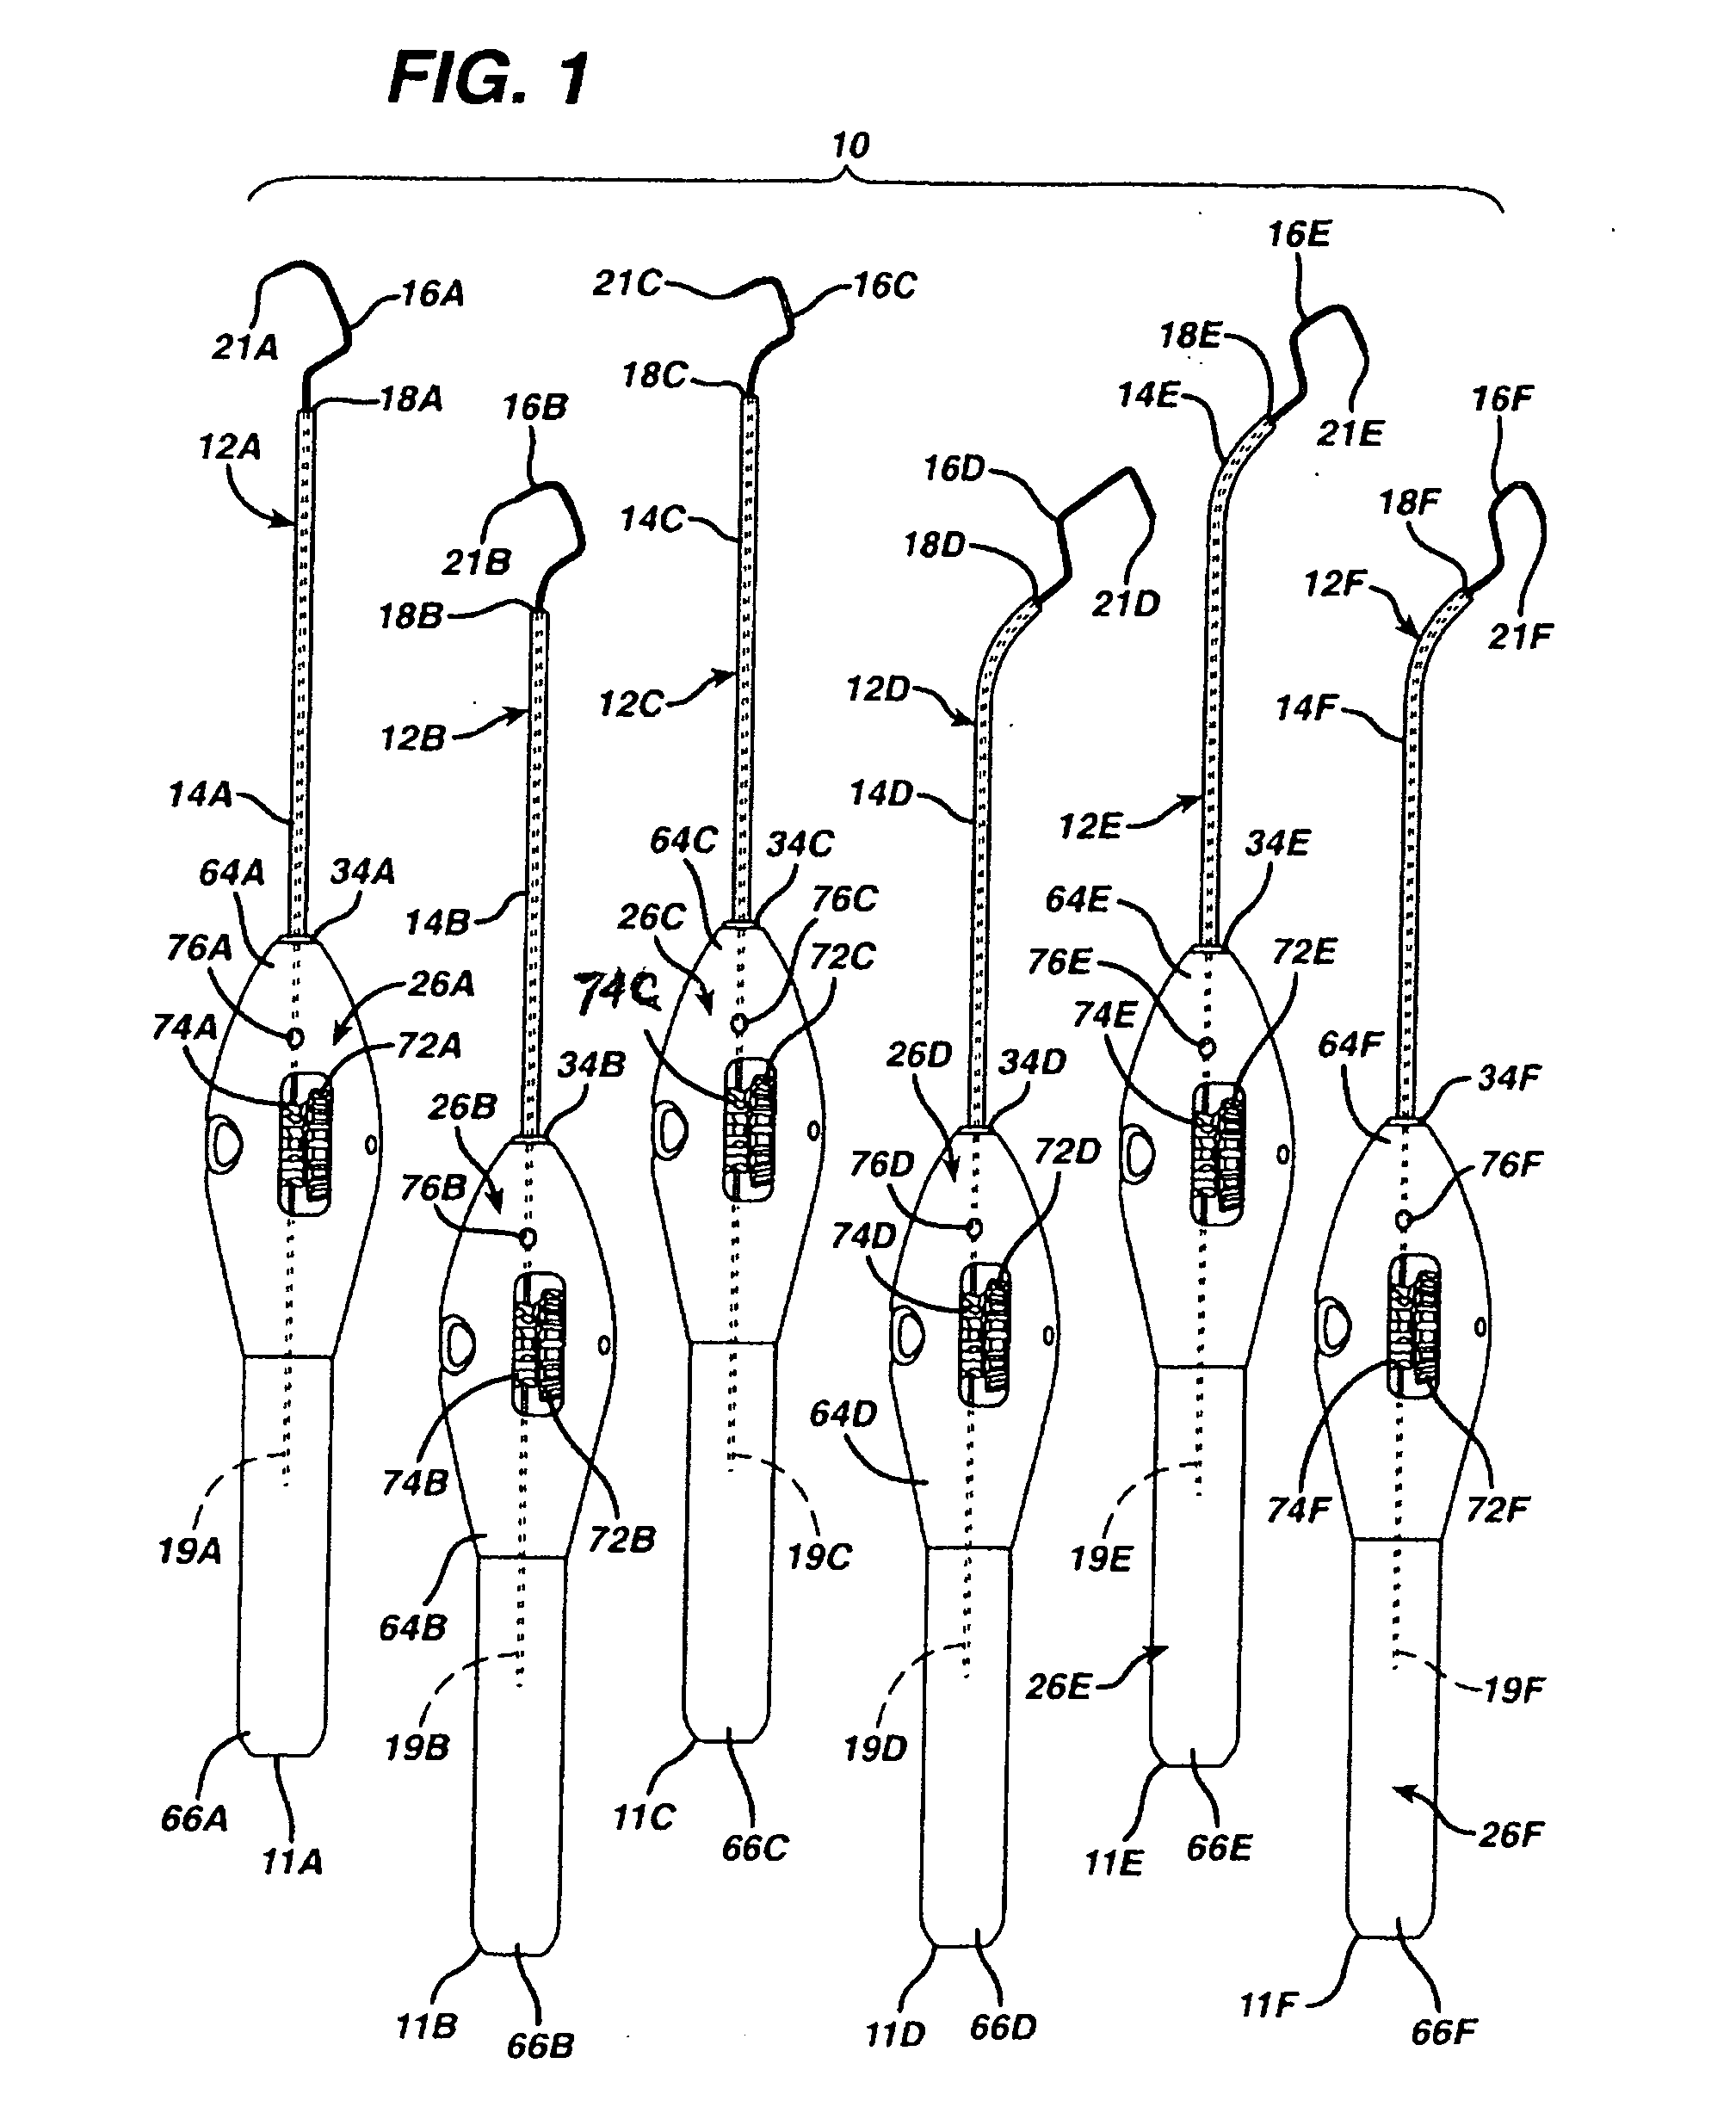 Implant system with sizing templates